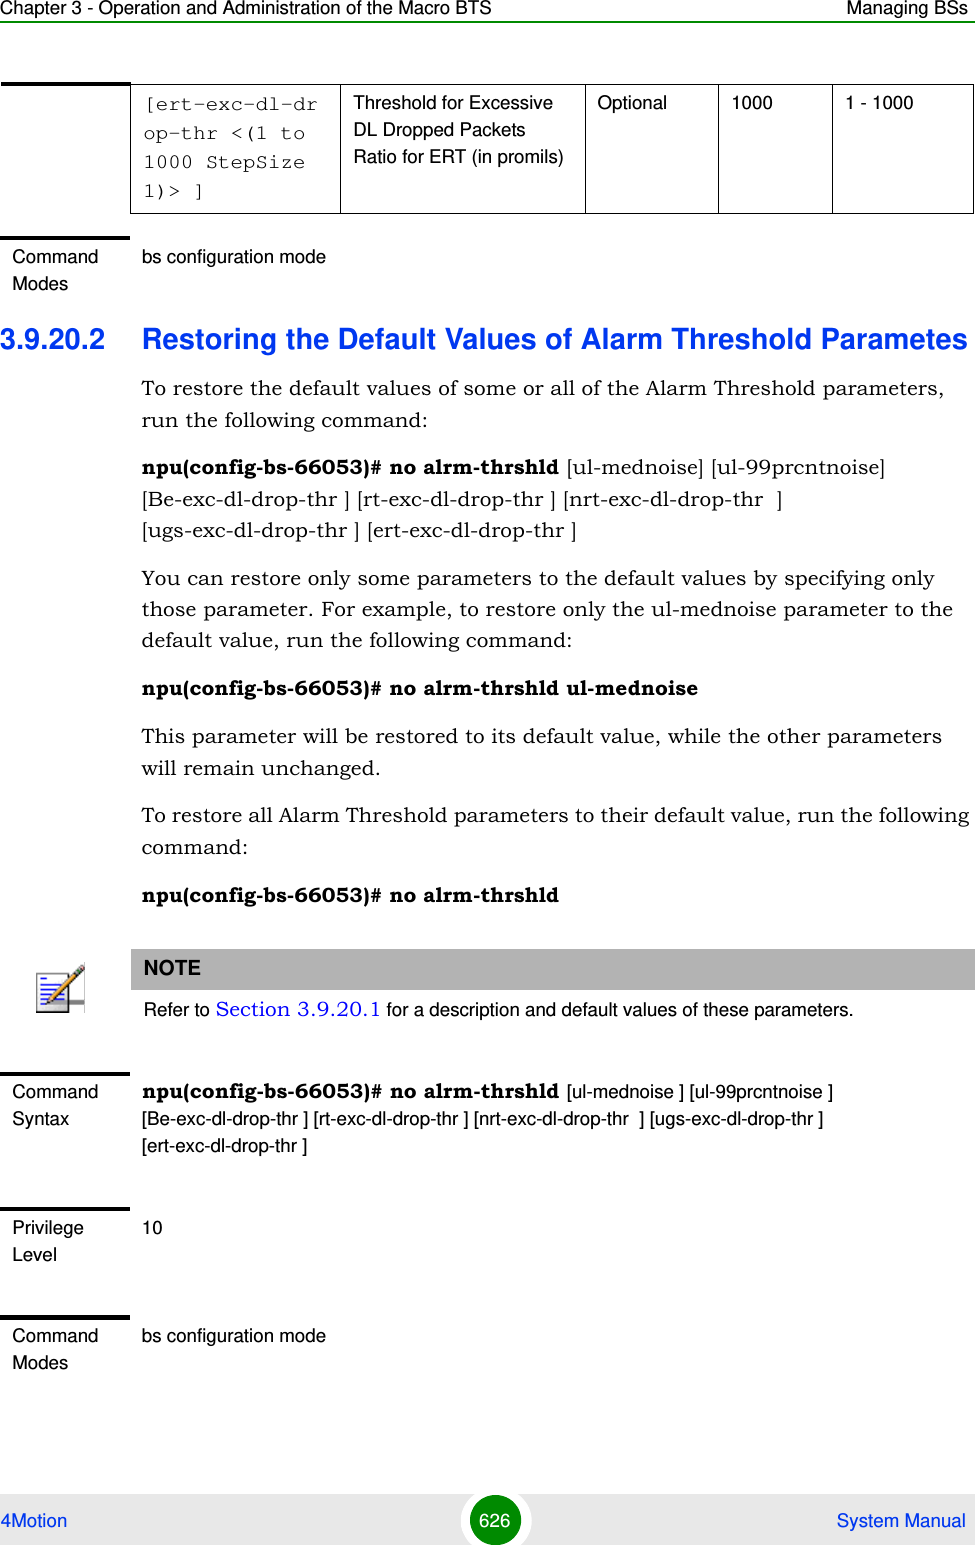 Chapter 3 - Operation and Administration of the Macro BTS Managing BSs4Motion 626  System Manual3.9.20.2 Restoring the Default Values of Alarm Threshold ParametesTo restore the default values of some or all of the Alarm Threshold parameters, run the following command:npu(config-bs-66053)# no alrm-thrshld [ul-mednoise] [ul-99prcntnoise] [Be-exc-dl-drop-thr ] [rt-exc-dl-drop-thr ] [nrt-exc-dl-drop-thr  ] [ugs-exc-dl-drop-thr ] [ert-exc-dl-drop-thr ]You can restore only some parameters to the default values by specifying only those parameter. For example, to restore only the ul-mednoise parameter to the default value, run the following command:npu(config-bs-66053)# no alrm-thrshld ul-mednoiseThis parameter will be restored to its default value, while the other parameters will remain unchanged.To restore all Alarm Threshold parameters to their default value, run the following command:npu(config-bs-66053)# no alrm-thrshld[ert-exc-dl-drop-thr &lt;(1 to 1000 StepSize 1)&gt; ]Threshold for Excessive DL Dropped Packets Ratio for ERT (in promils)Optional 1000 1 - 1000Command Modesbs configuration modeNOTERefer to Section 3.9.20.1 for a description and default values of these parameters.Command Syntaxnpu(config-bs-66053)# no alrm-thrshld [ul-mednoise ] [ul-99prcntnoise ] [Be-exc-dl-drop-thr ] [rt-exc-dl-drop-thr ] [nrt-exc-dl-drop-thr  ] [ugs-exc-dl-drop-thr ] [ert-exc-dl-drop-thr ]Privilege Level10Command Modesbs configuration mode